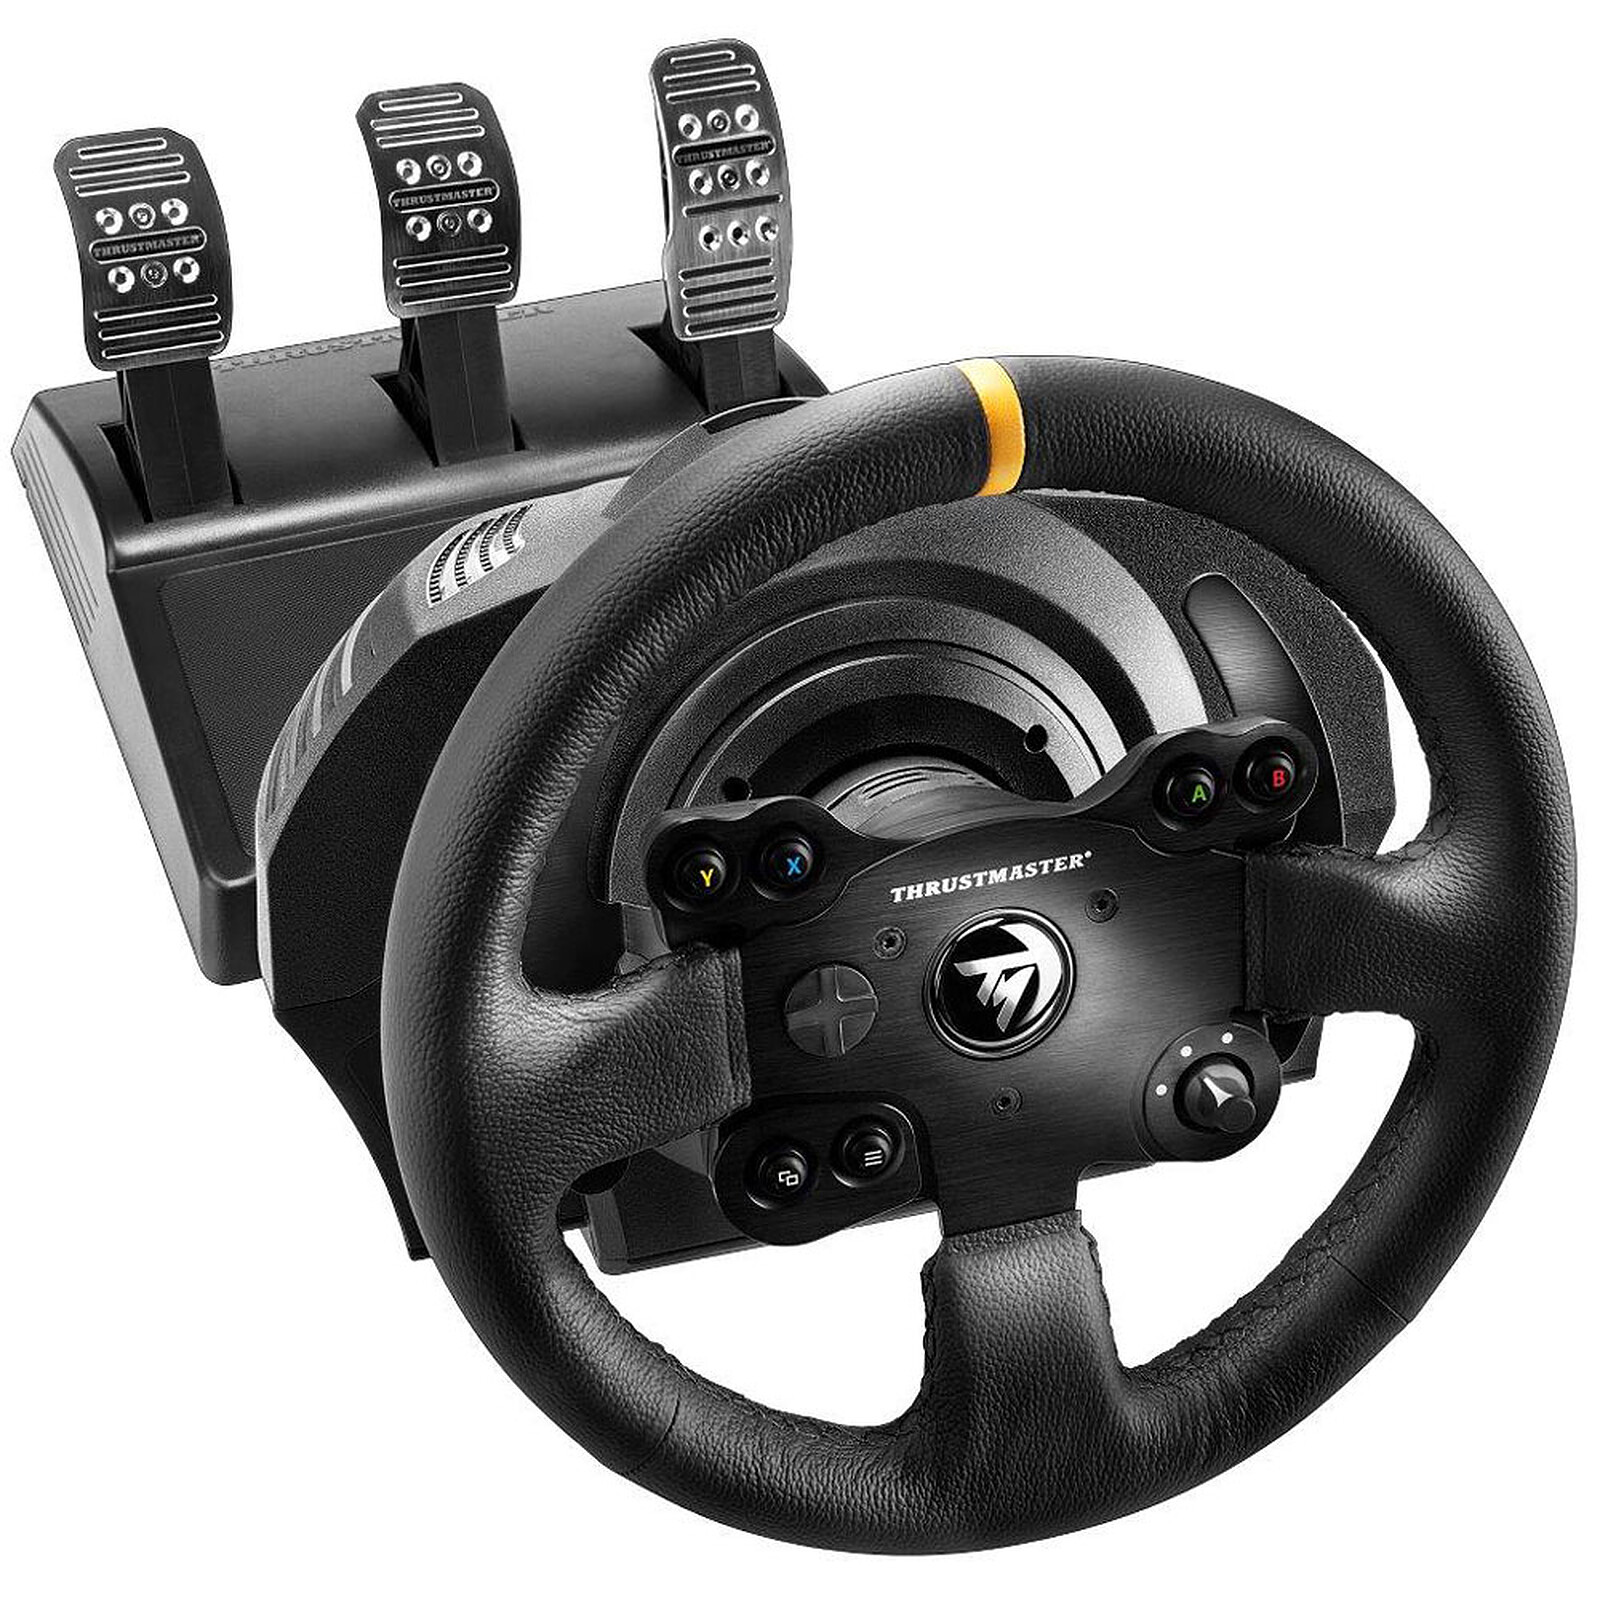 Thrustmaster TX Racing Wheel Leather Edition - Accessoires Xbox One -  Garantie 3 ans LDLC